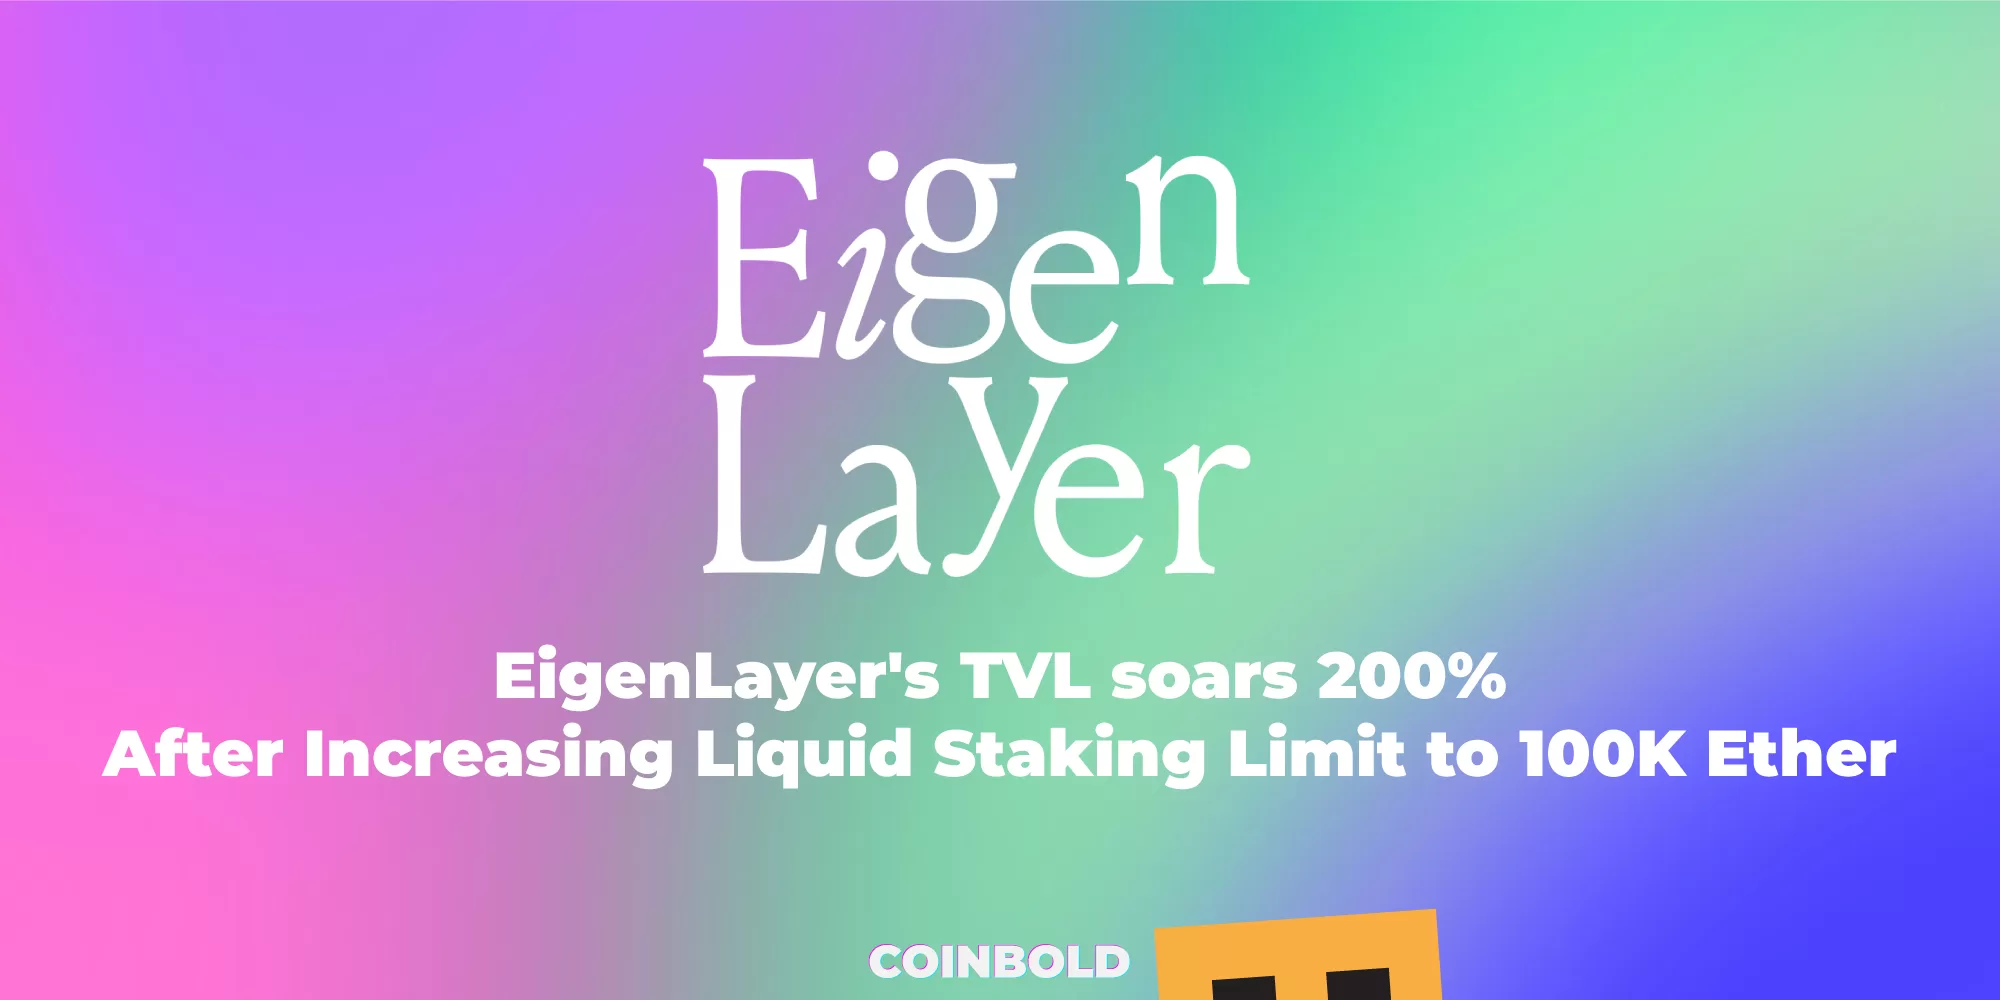 EigenLayer's TVL soars 200% After Increasing Liquid Staking Limit to 100K Ether